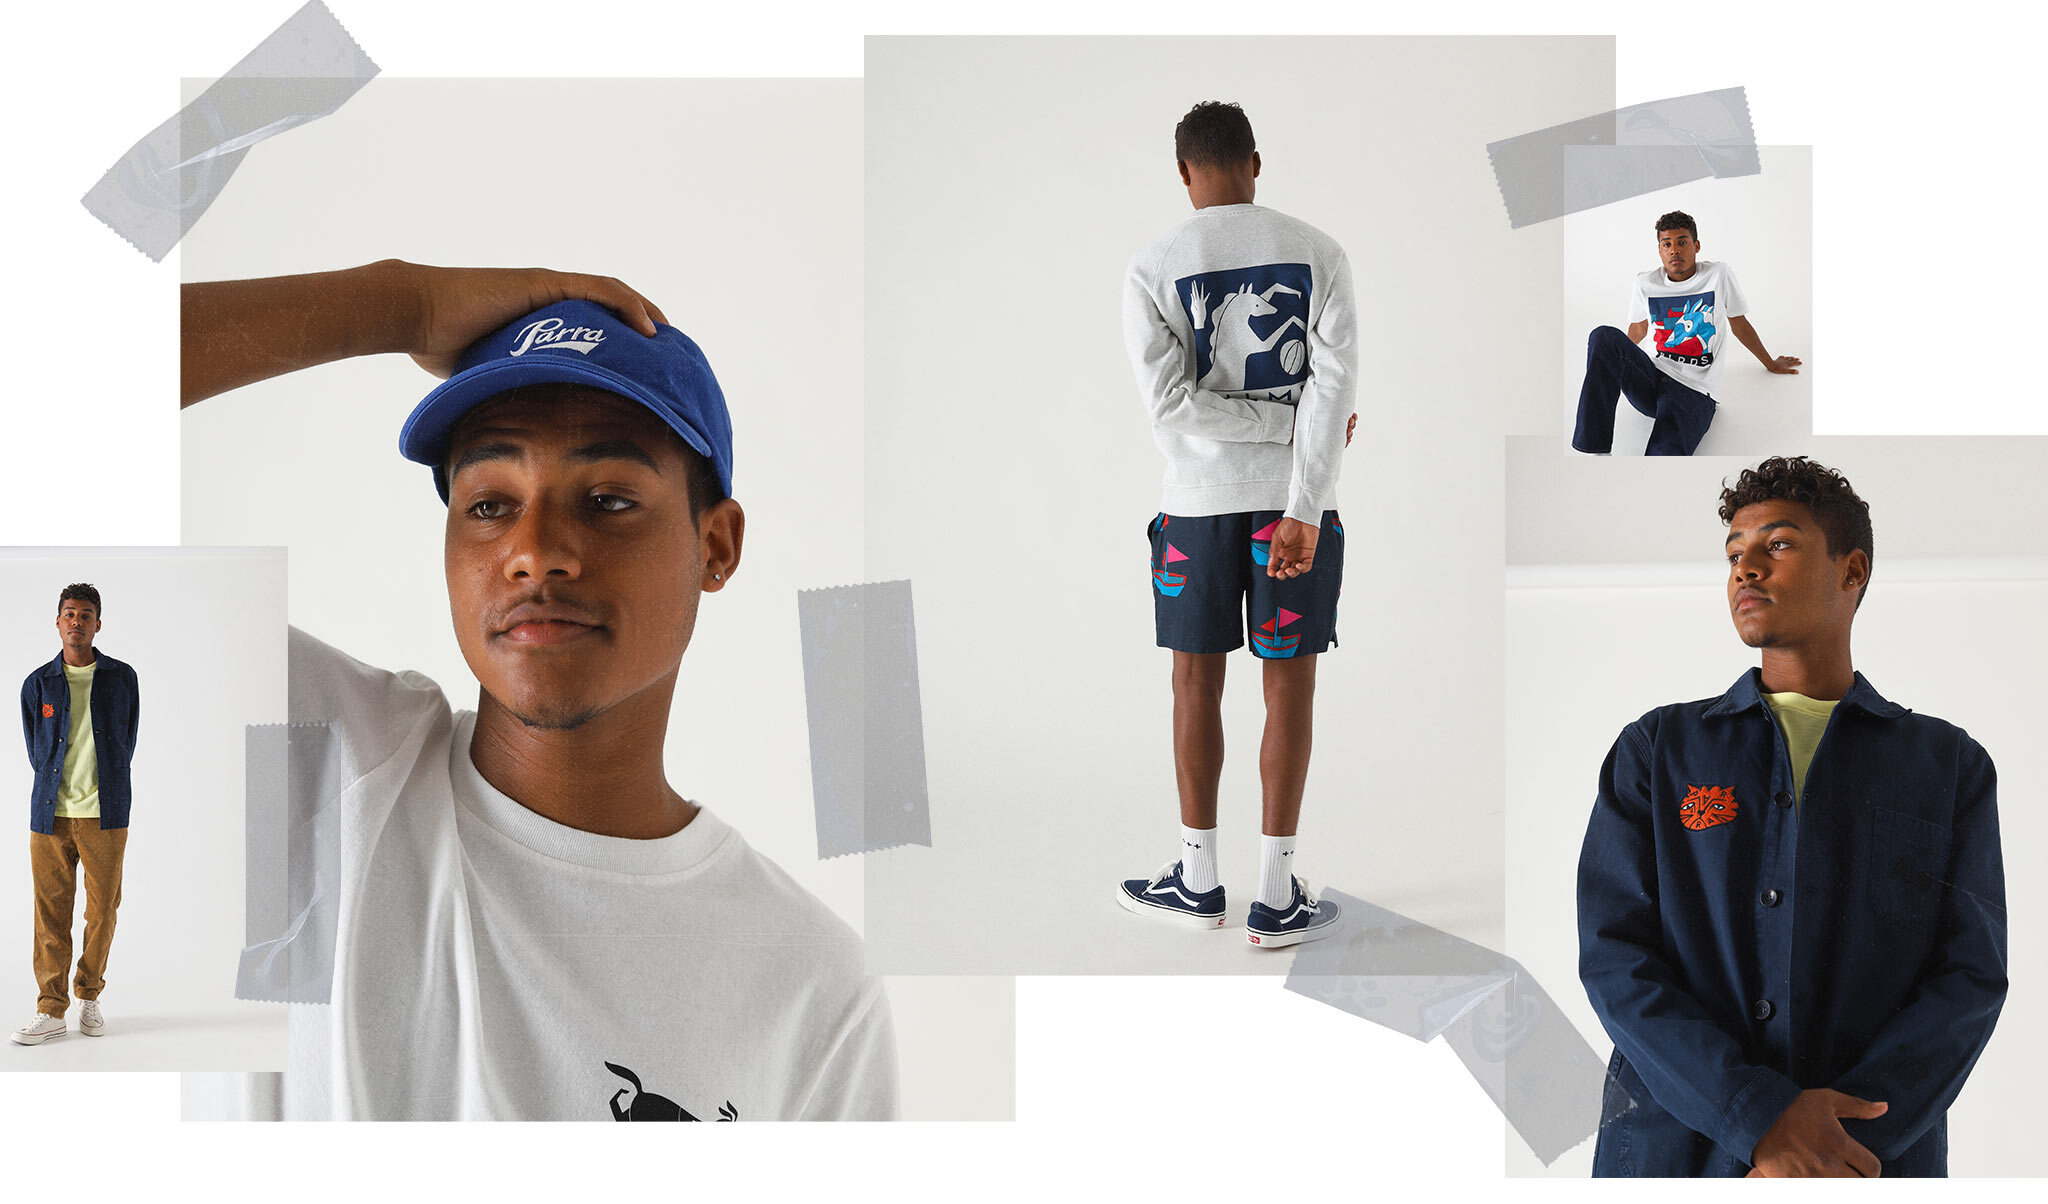 A new collection of by Parra